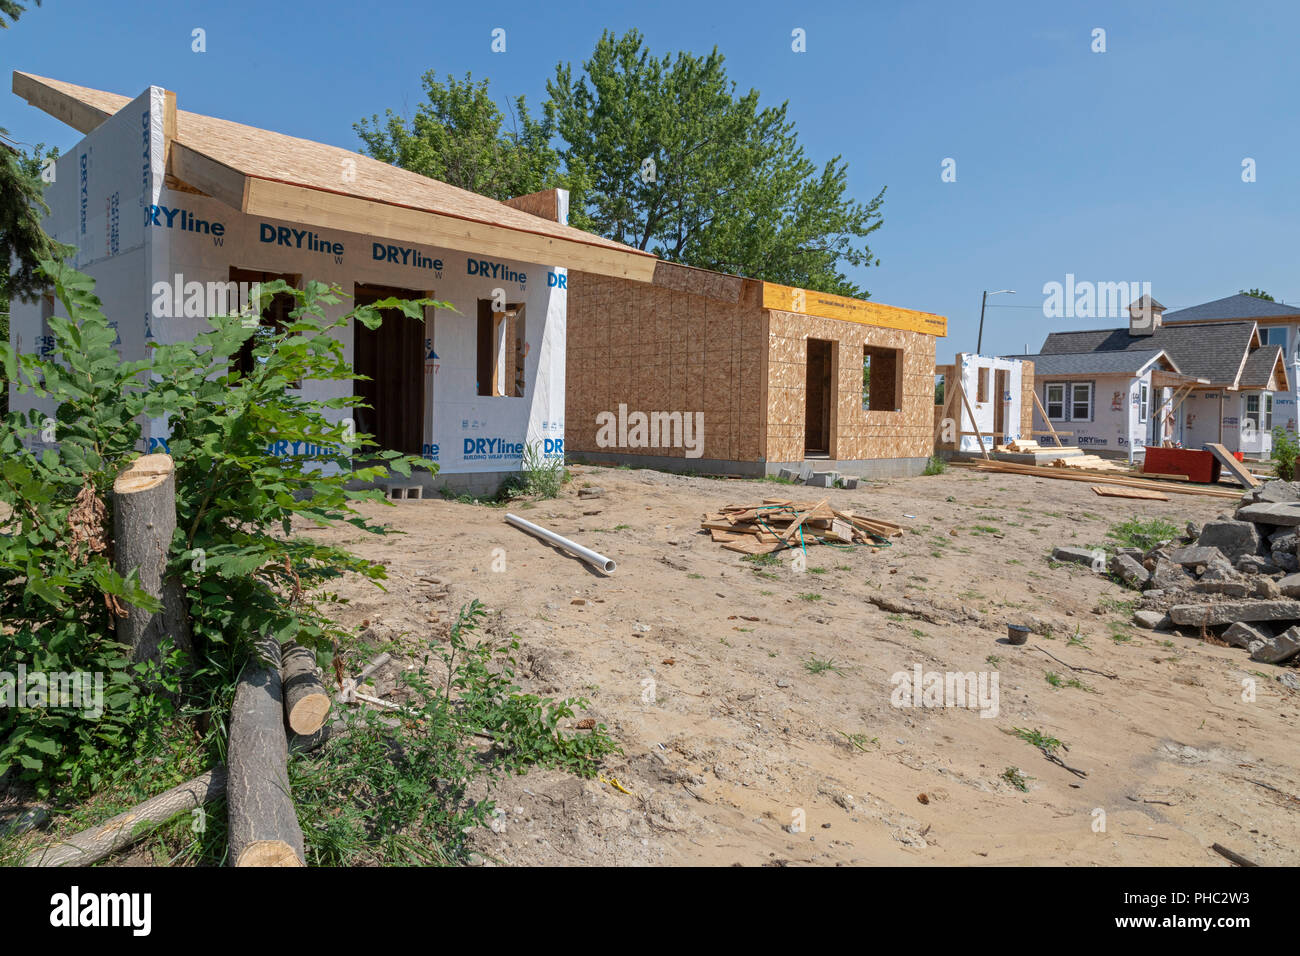 Graduated payment mortgage GPM sign and tiny houses Stock Photo - Alamy